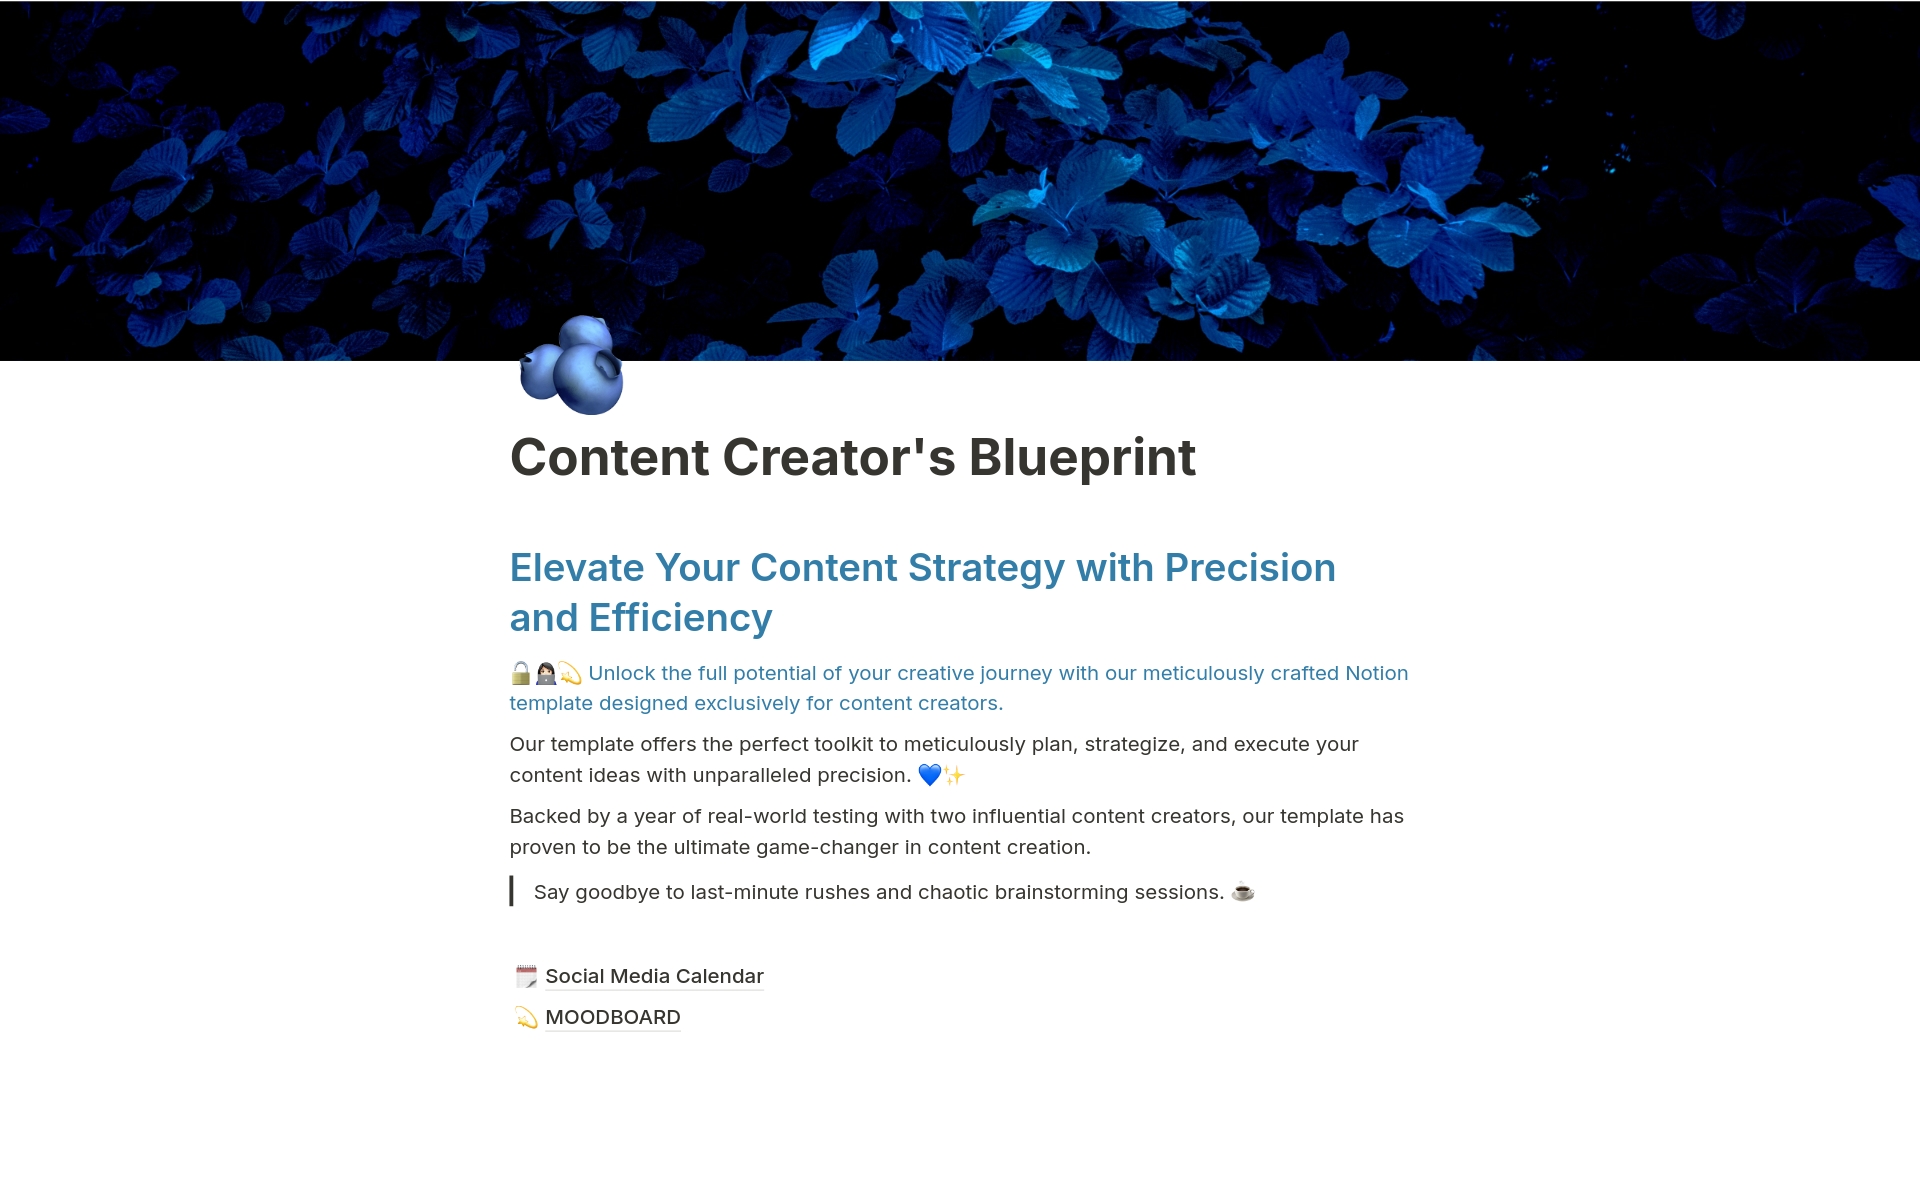 Elevate Your Content Strategy with Precision and Efficiency.

🔓👩🏻‍💻💫 Unlock the full potential of your creative journey with our meticulously crafted Notion template designed exclusively for content creators.